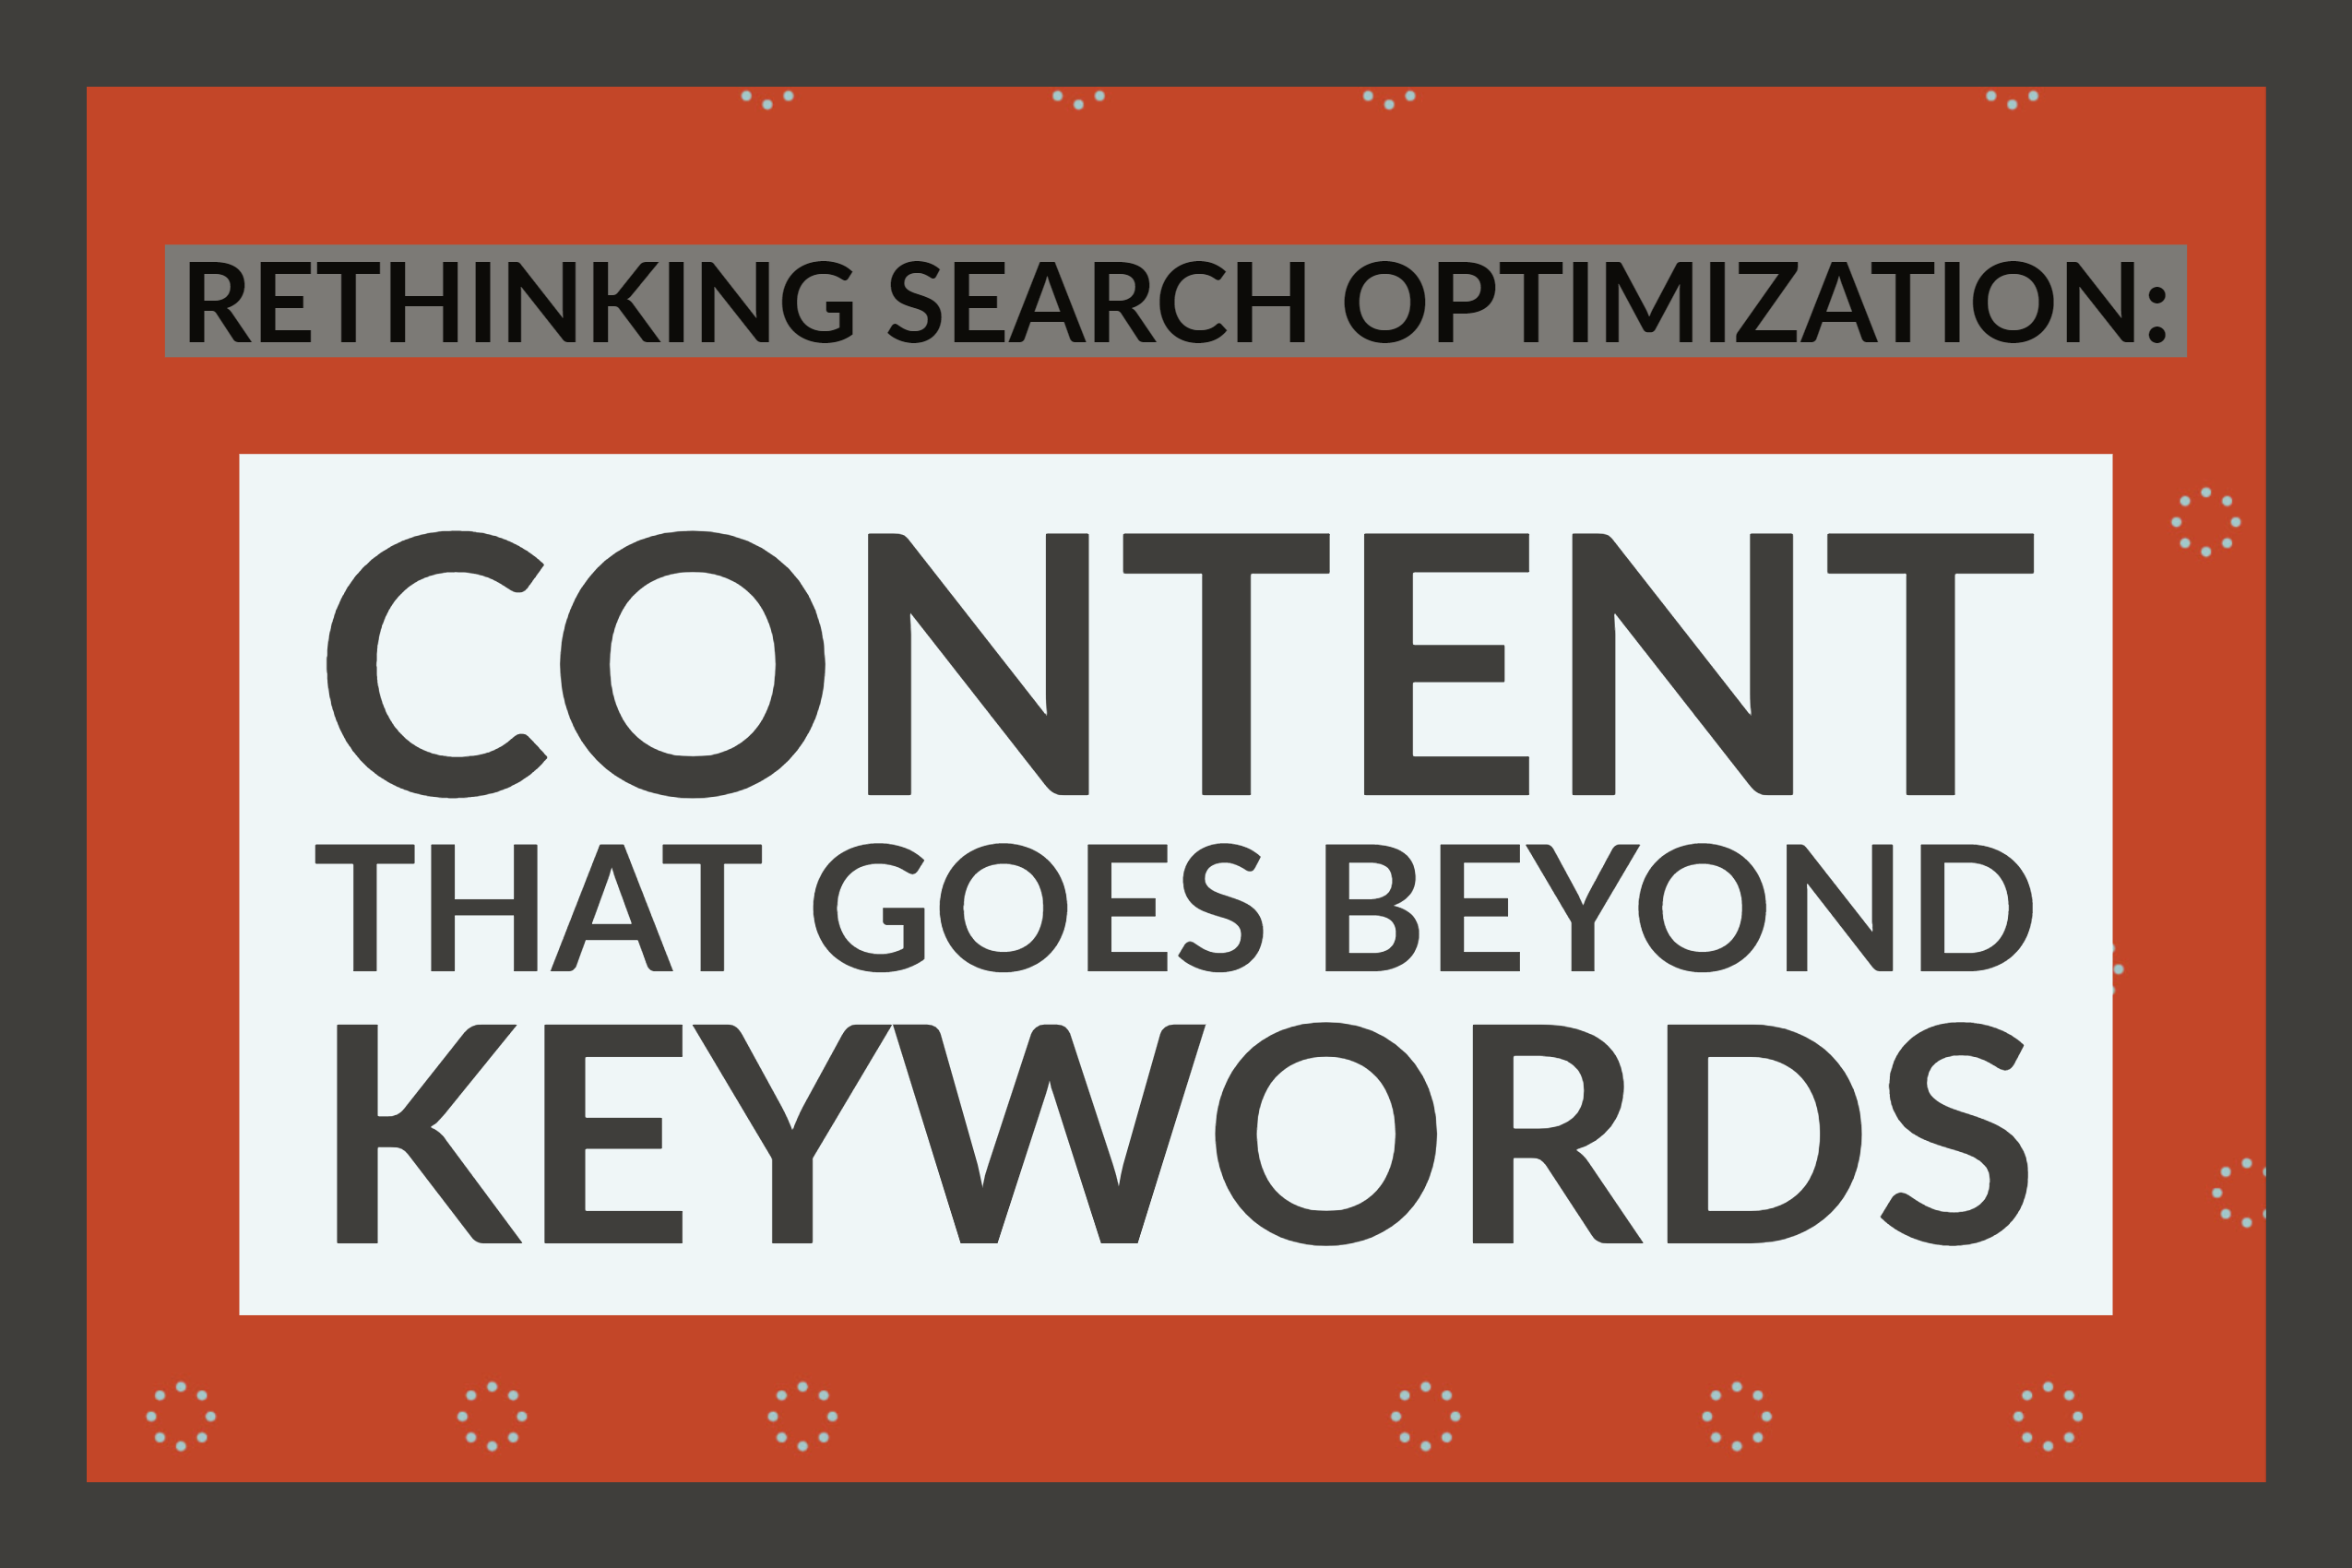 Rethinking Search Optimization: Content That Goes Beyond Keywords